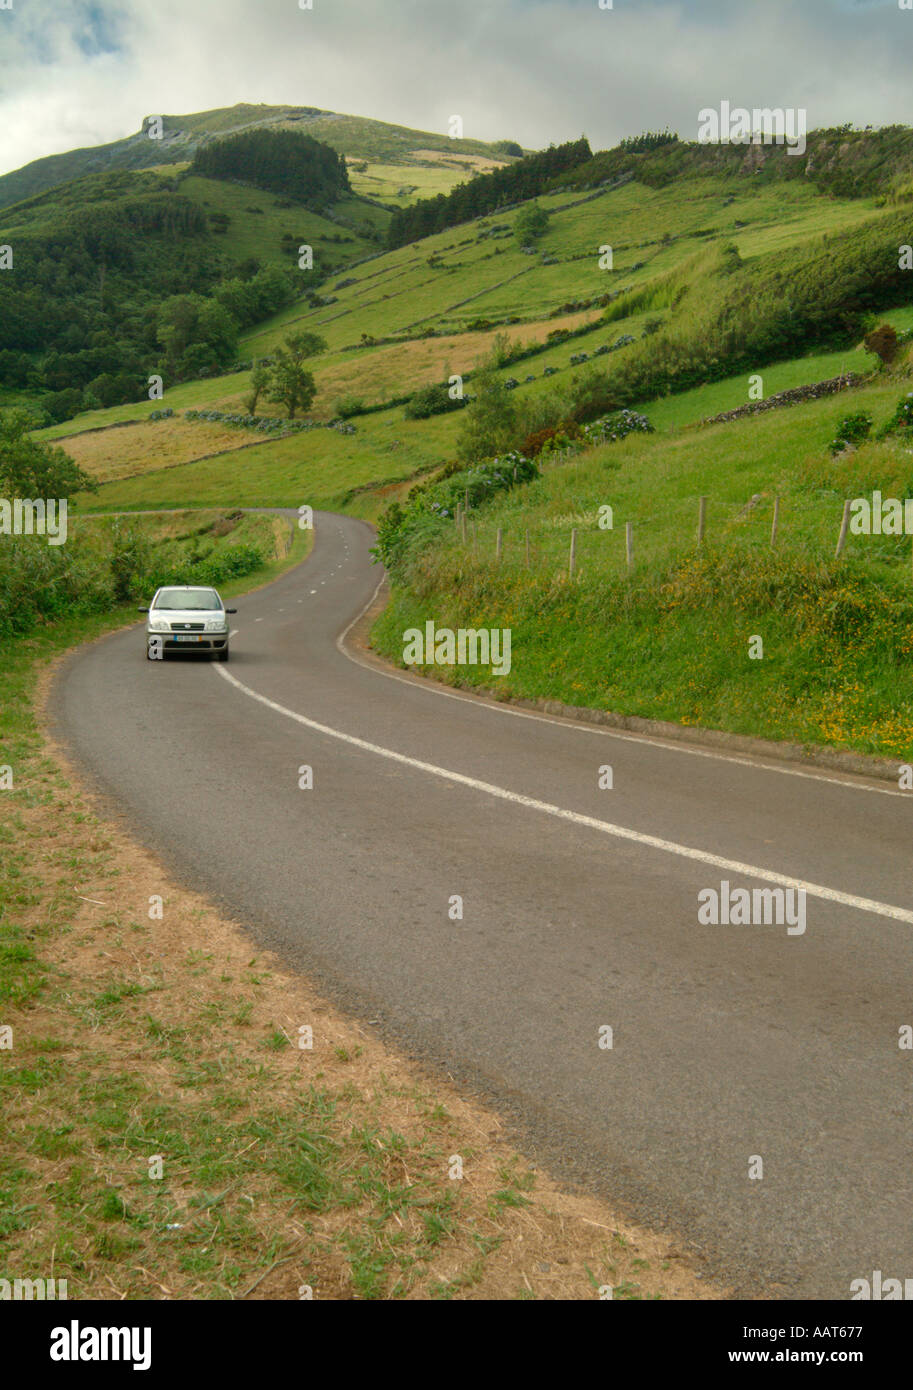 A road near the town of Lages through hilly patchwork farm fields on the island of Flores in the Azores Stock Photo